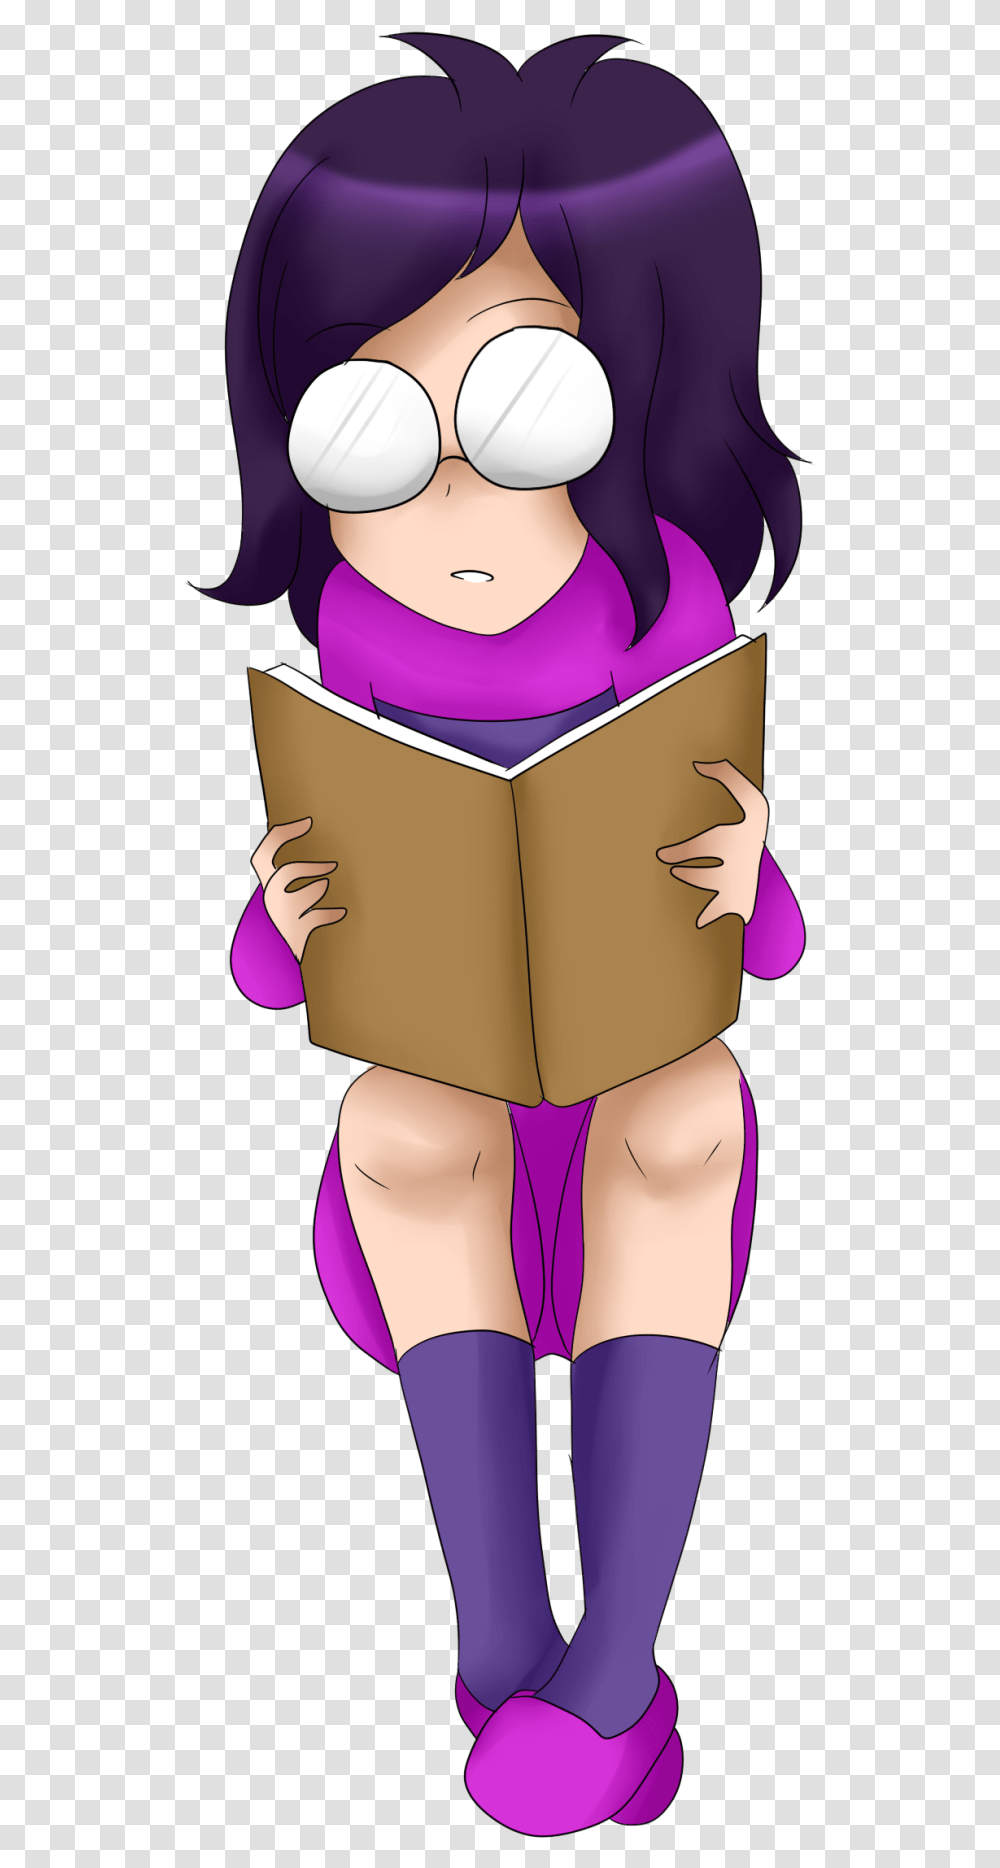 Anime Drawing Tumblr Cute Anime Girl Drawing Tumblr Cartoon, Person, Human, Reading, Student Transparent Png